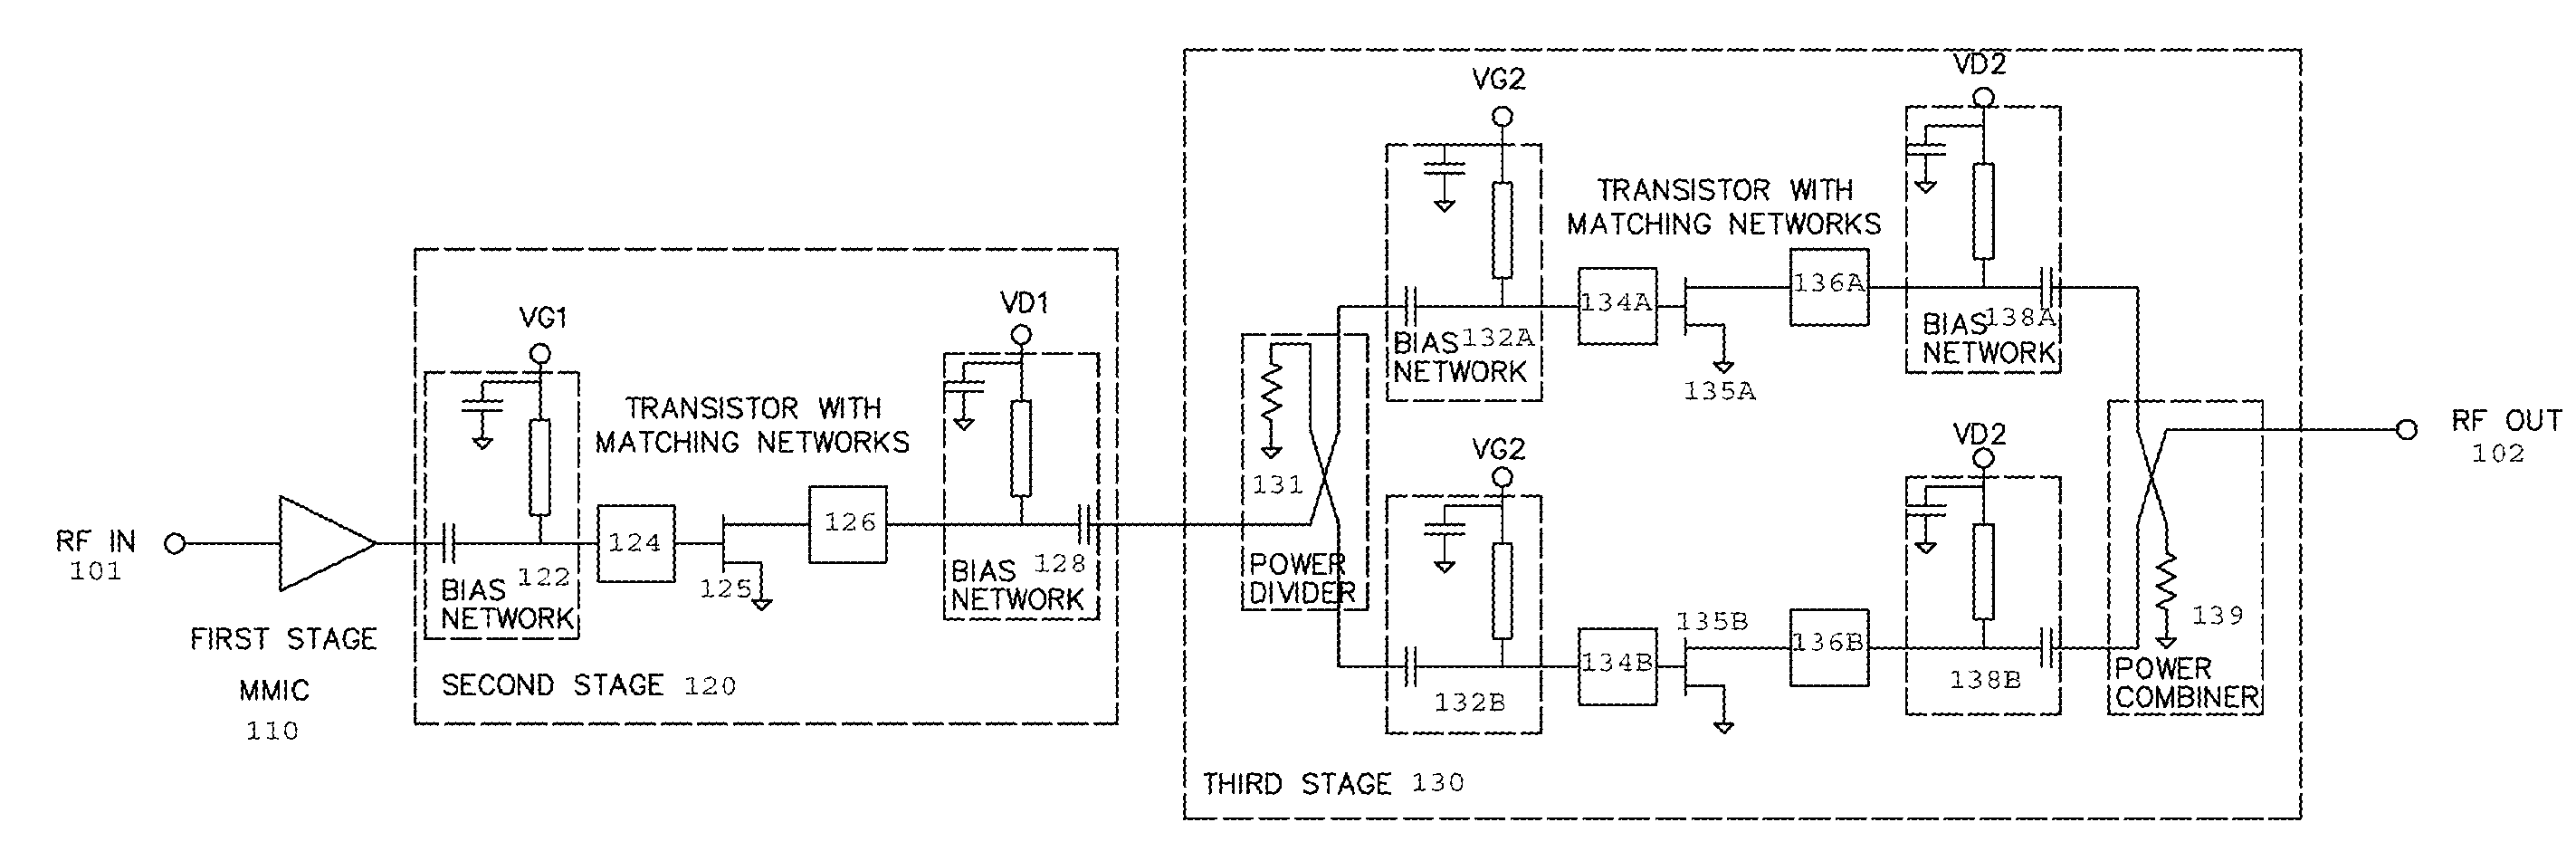 Multi-Stage RF Amplifier Including MMICs and Discrete Transistor Amplifiers in a Single Package